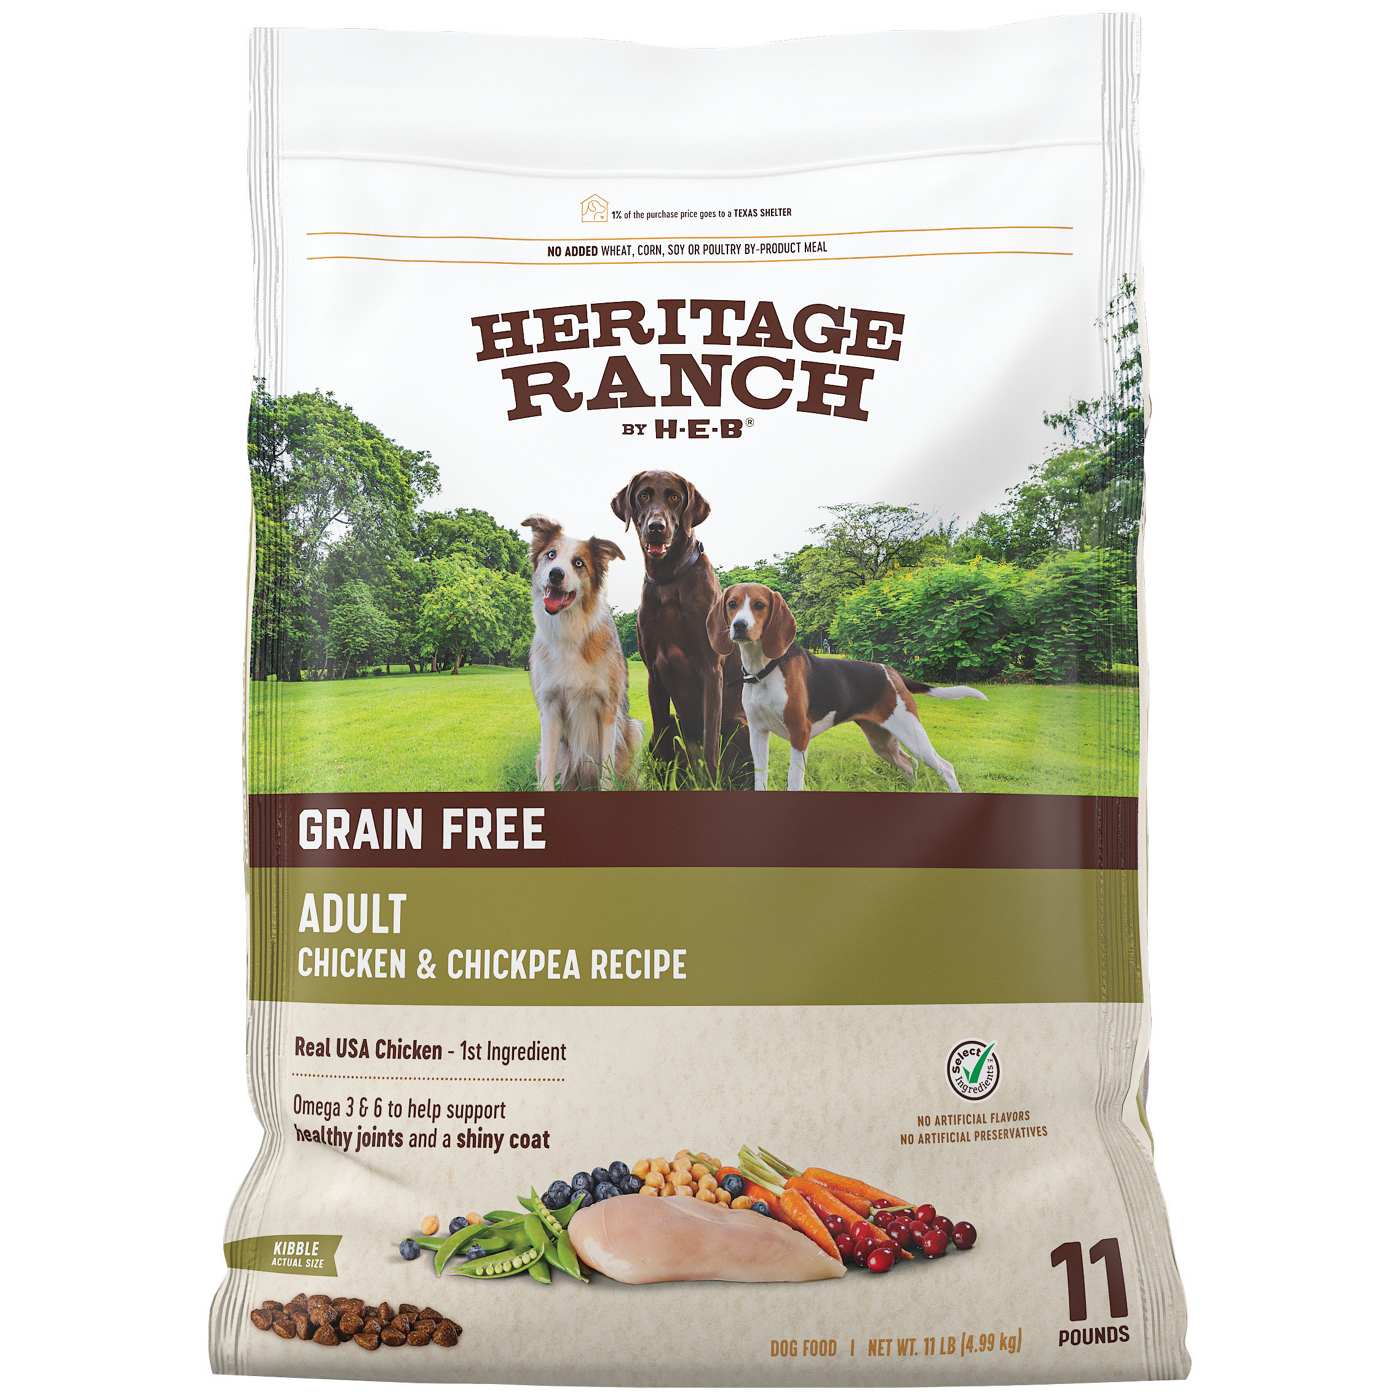 H-e-b Heritage Ranch Dog Food Recall Outlet Store